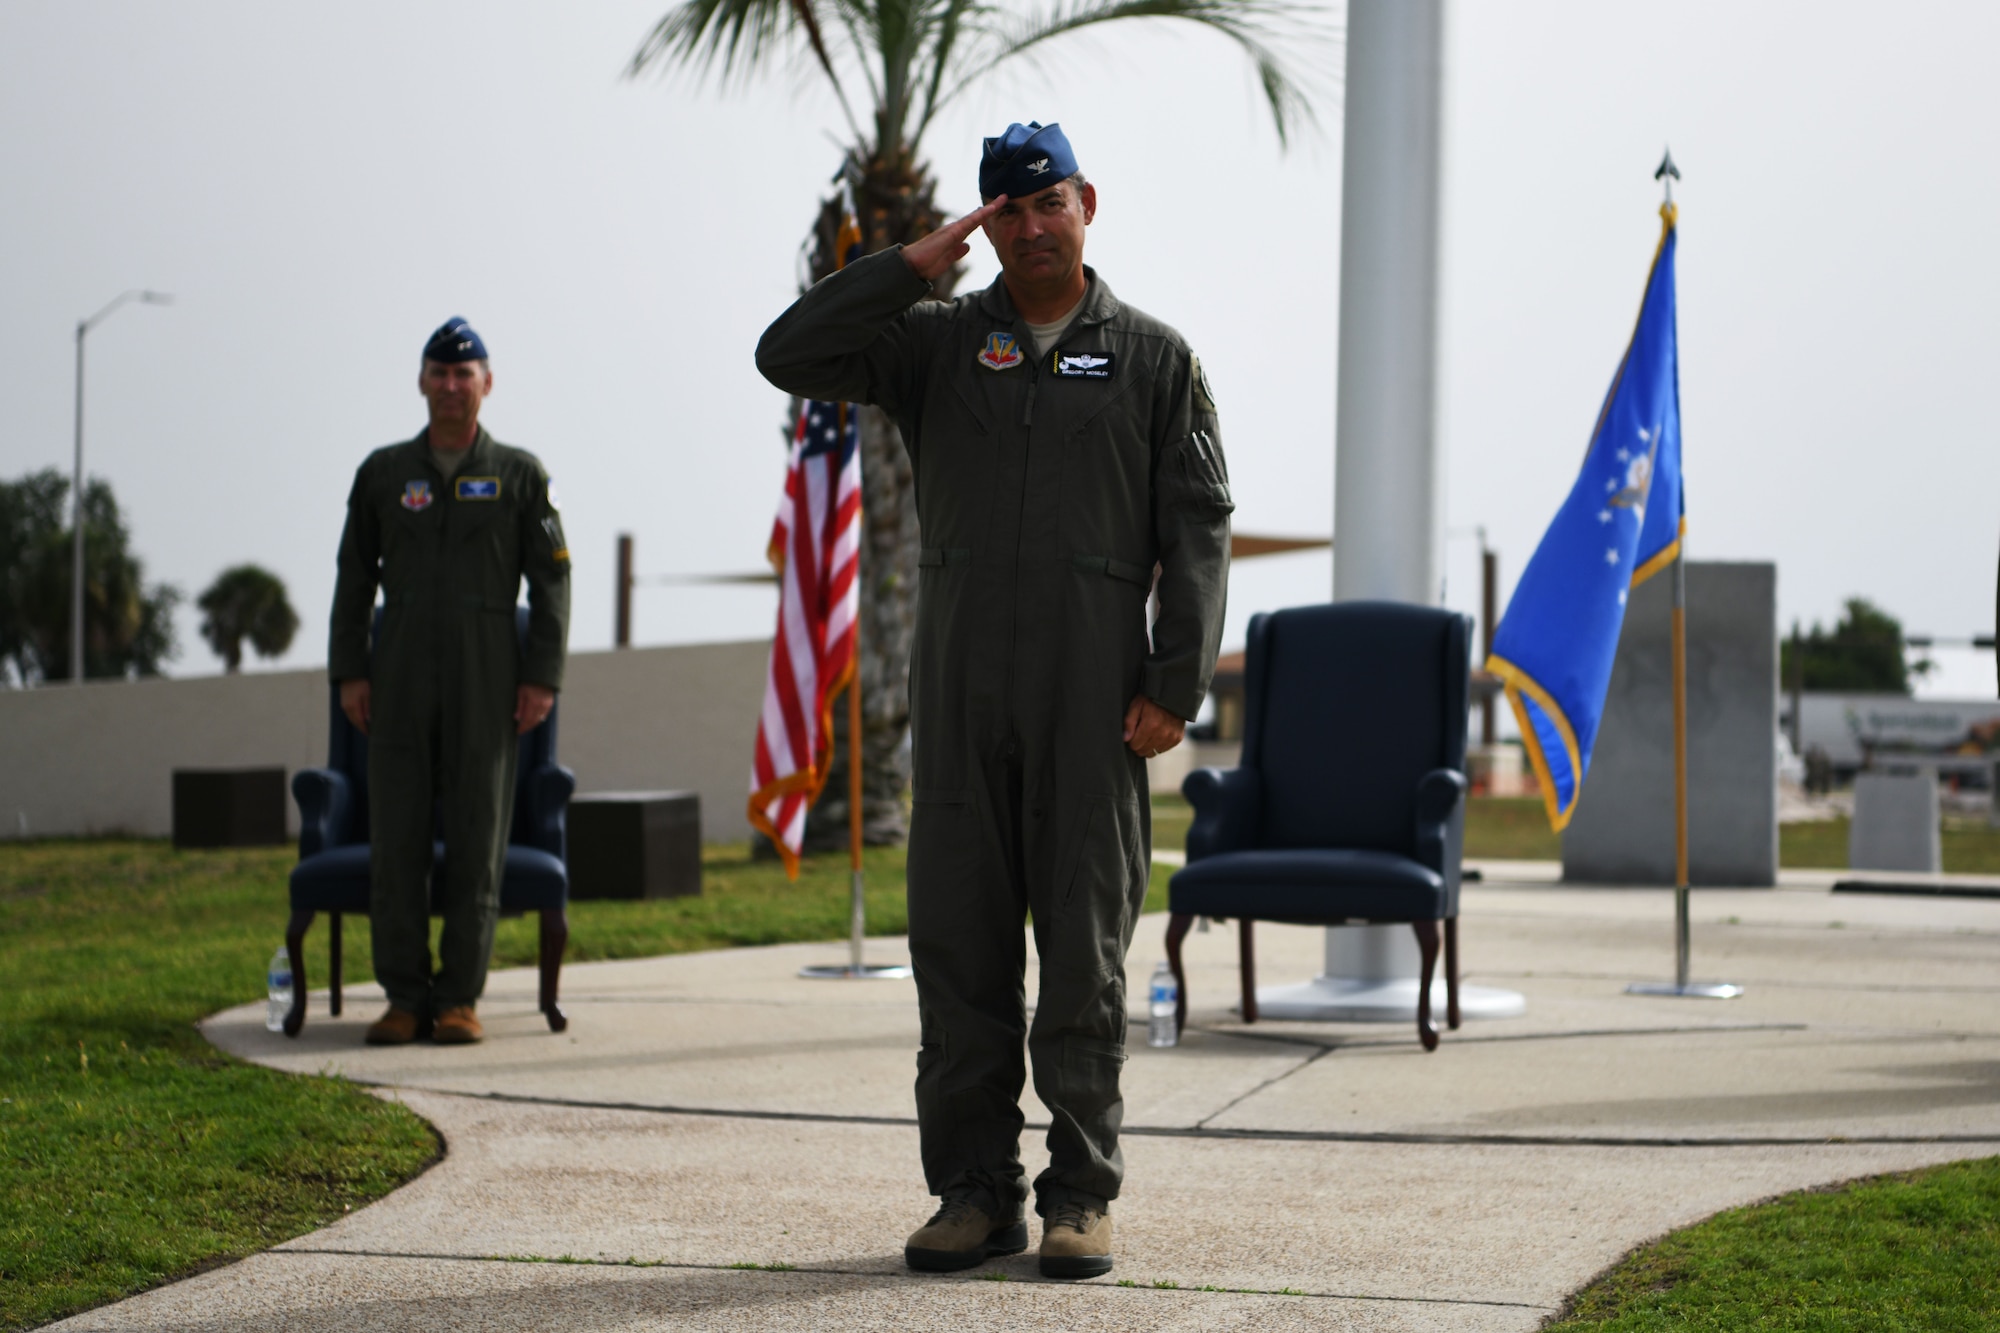 U.S. Air Force Col. Greg Moseley, 325th Fighter Wing commander, receives his first salute from the wing during a change of command ceremony at Tyndall Air Force Base, Florida, June 26, 2020. As the 325th FW commander, Moseley will oversee F-22 Raptor pilot training as well as the continued rebuild of the base following the damage done by Hurricane Michael in 2018. (U.S. Air Force photo by Tech. Sgt. Clayton Lenhardt)